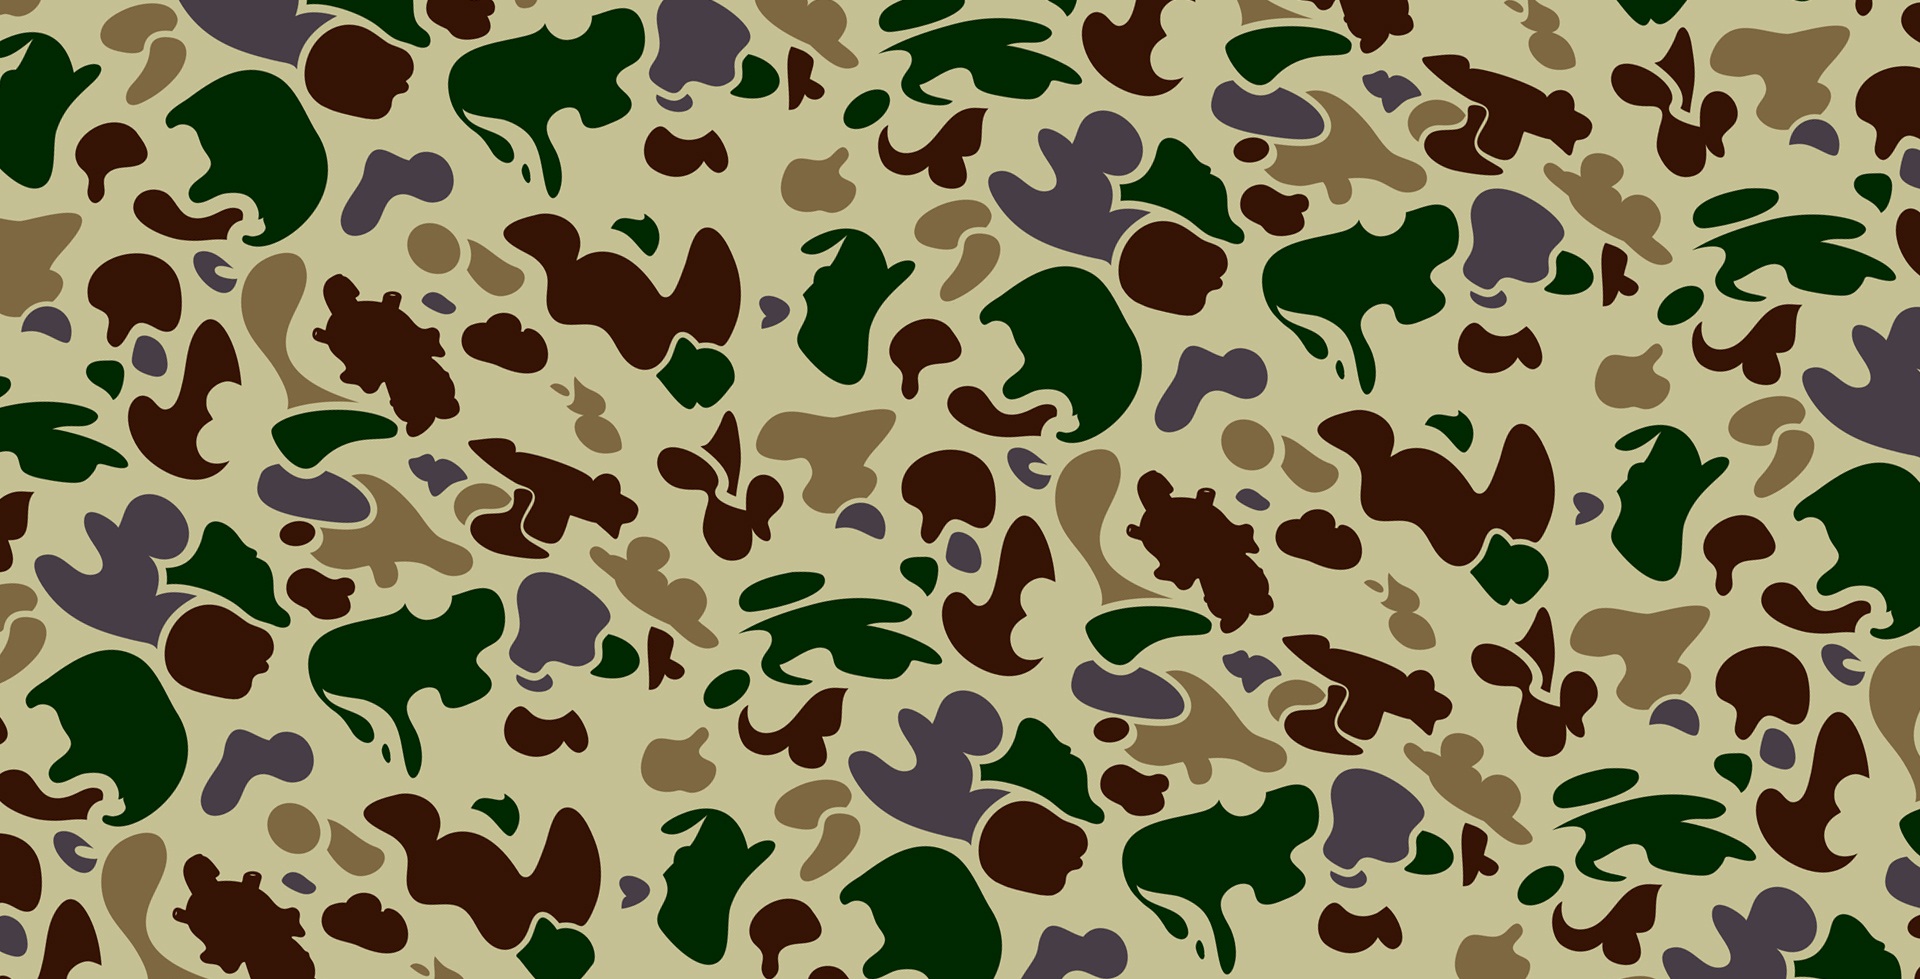 Bape Camo Iphone 5 Wallpaper Images Pictures   Becuo